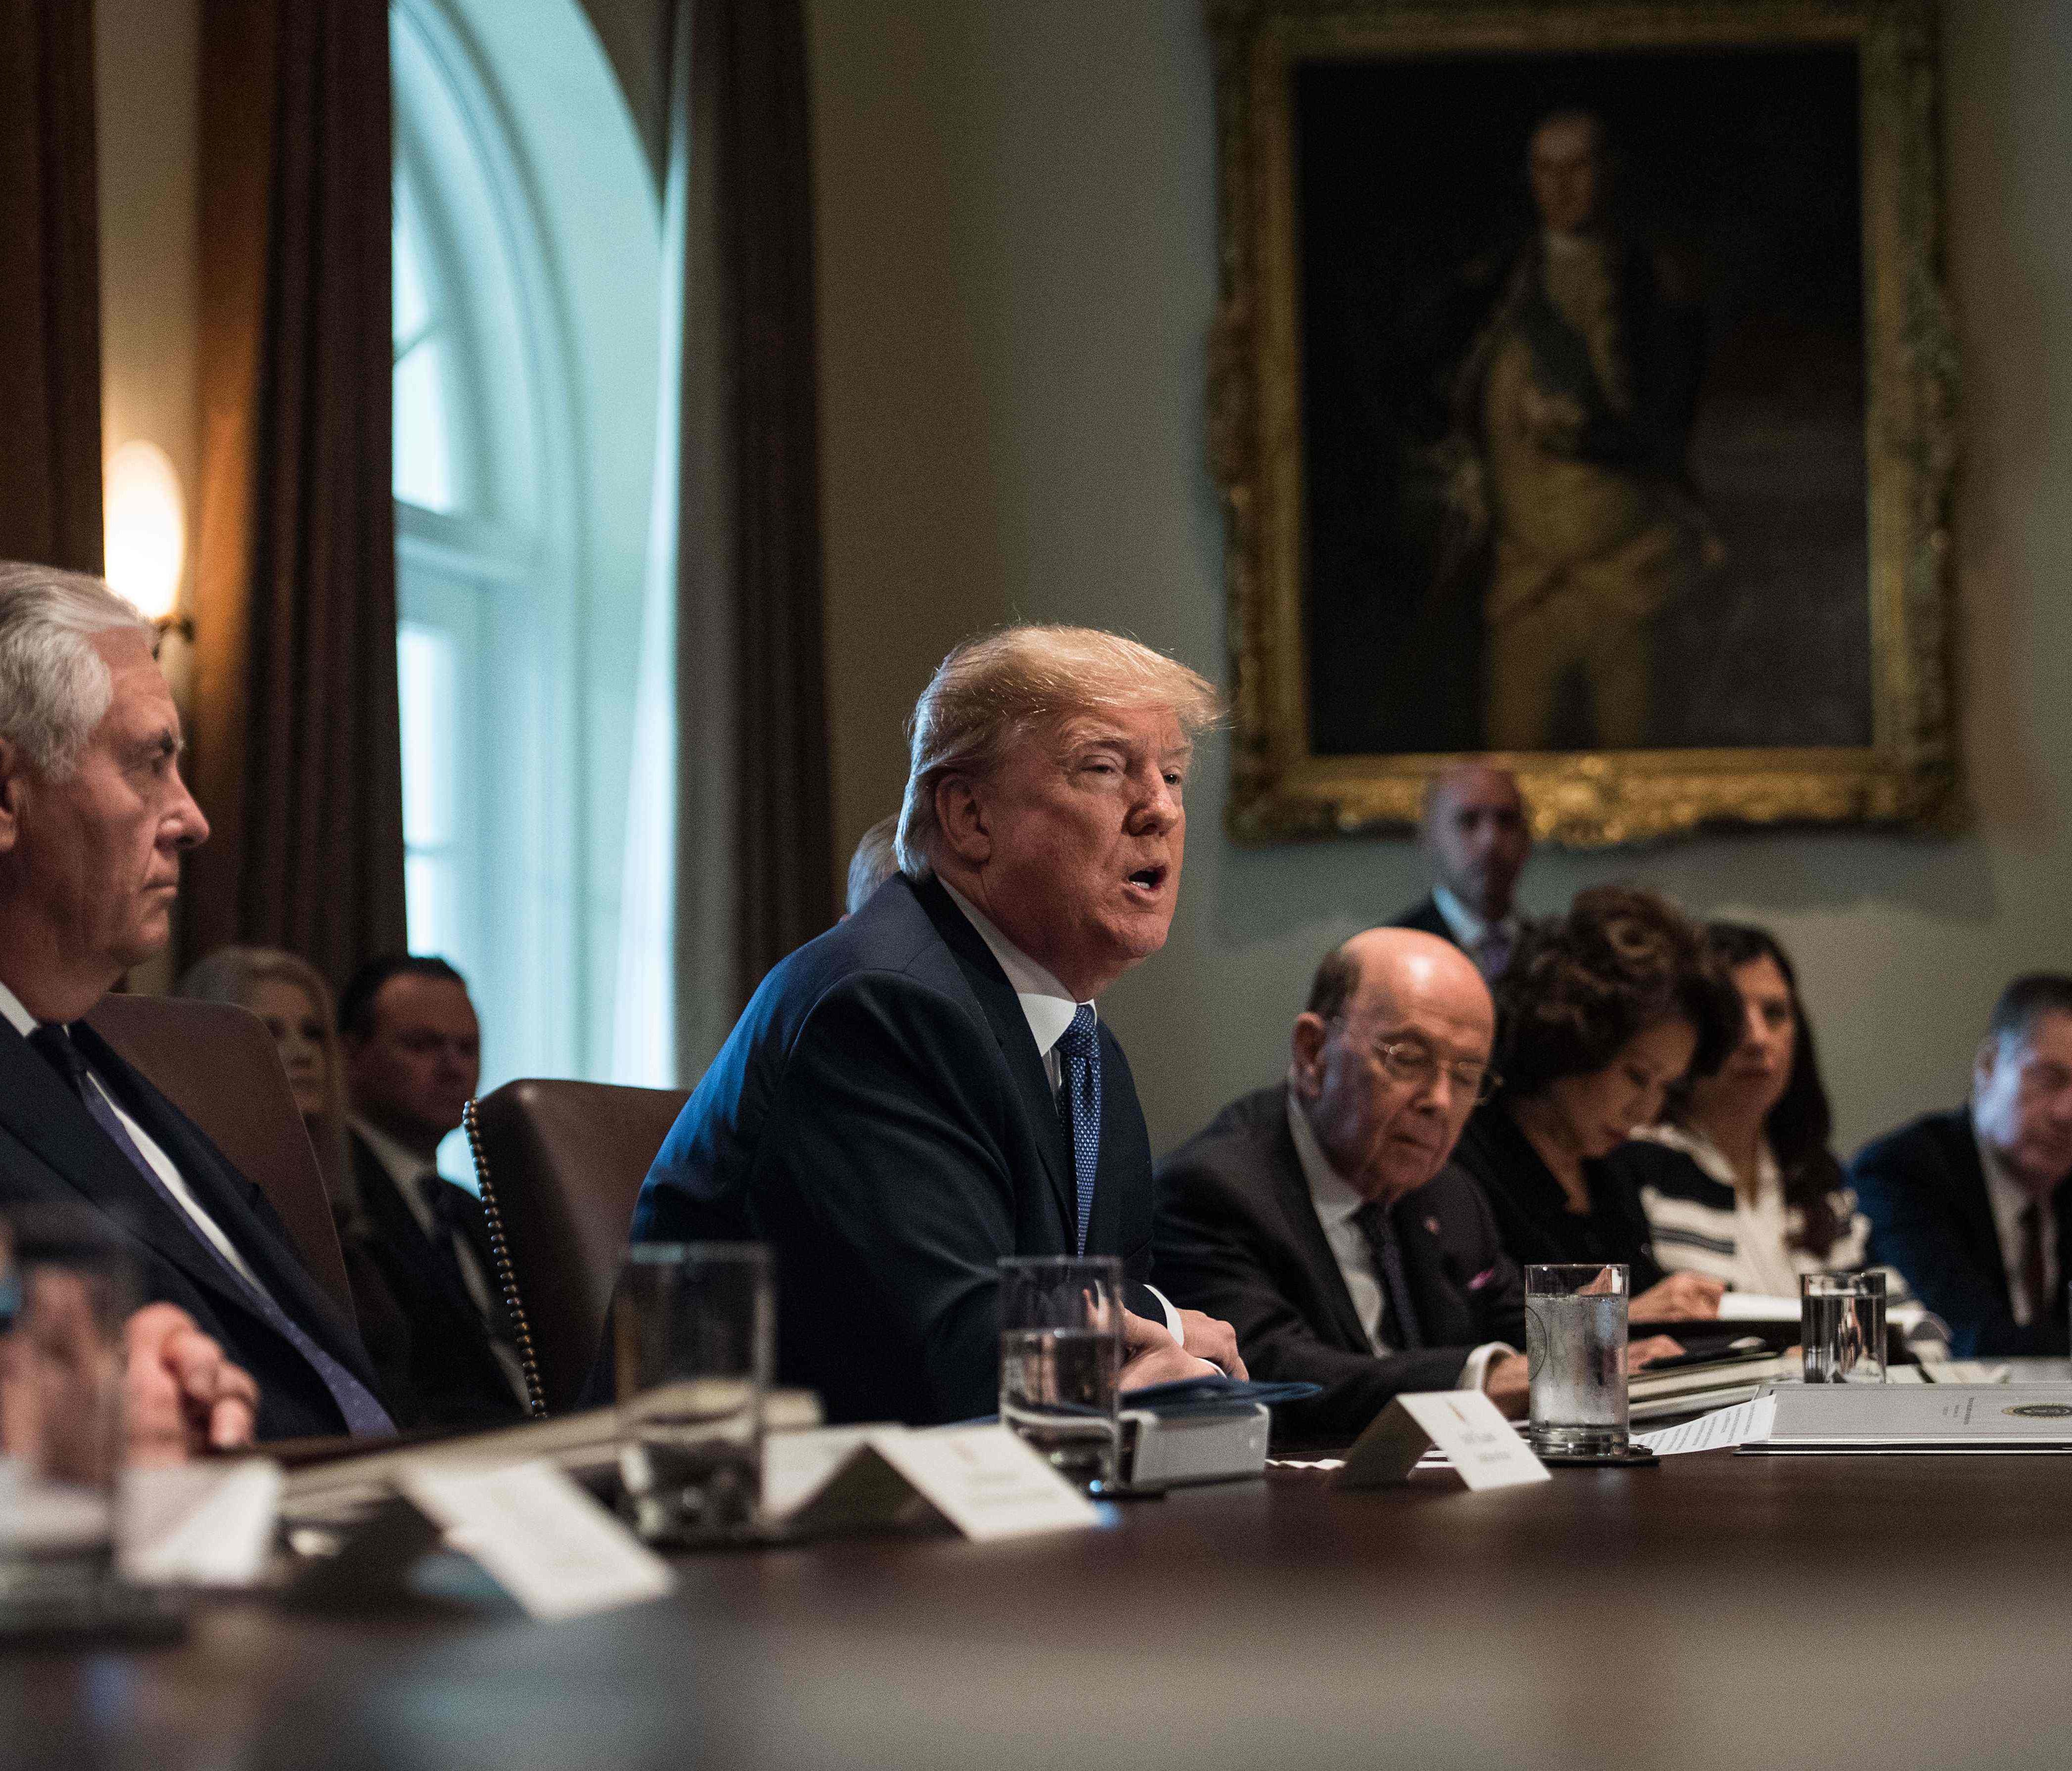 President Trump speaks during a cabinet meeting at the White House in Washington, DC, on November 1, 2017.